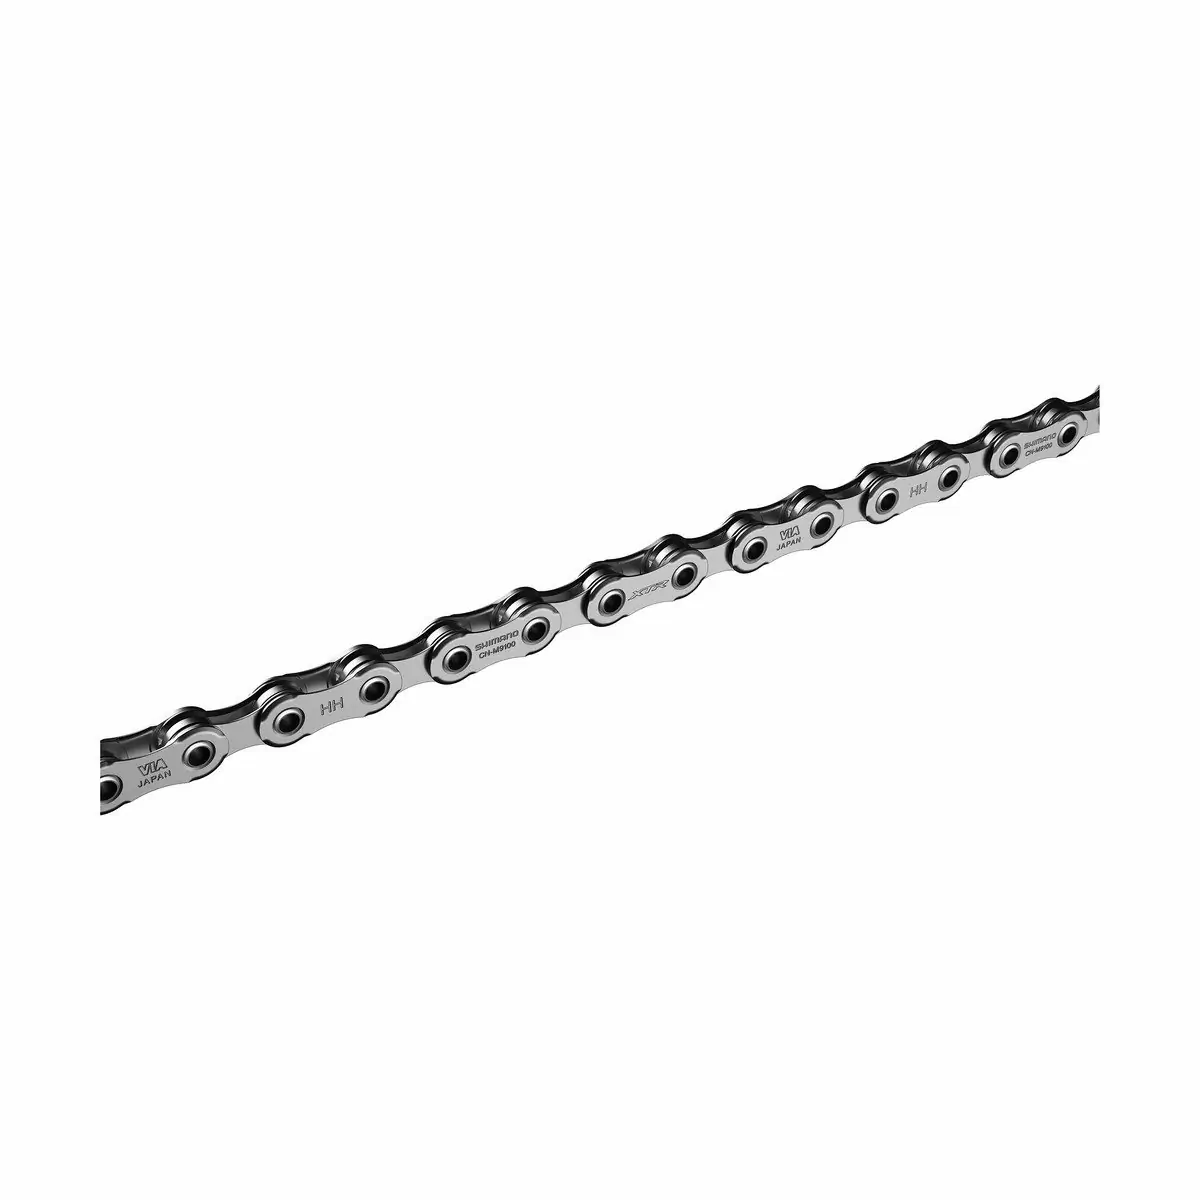 XTR/Dura-Ace CN-M9100 12-speed Quick Link chain 116 links 2019 - image